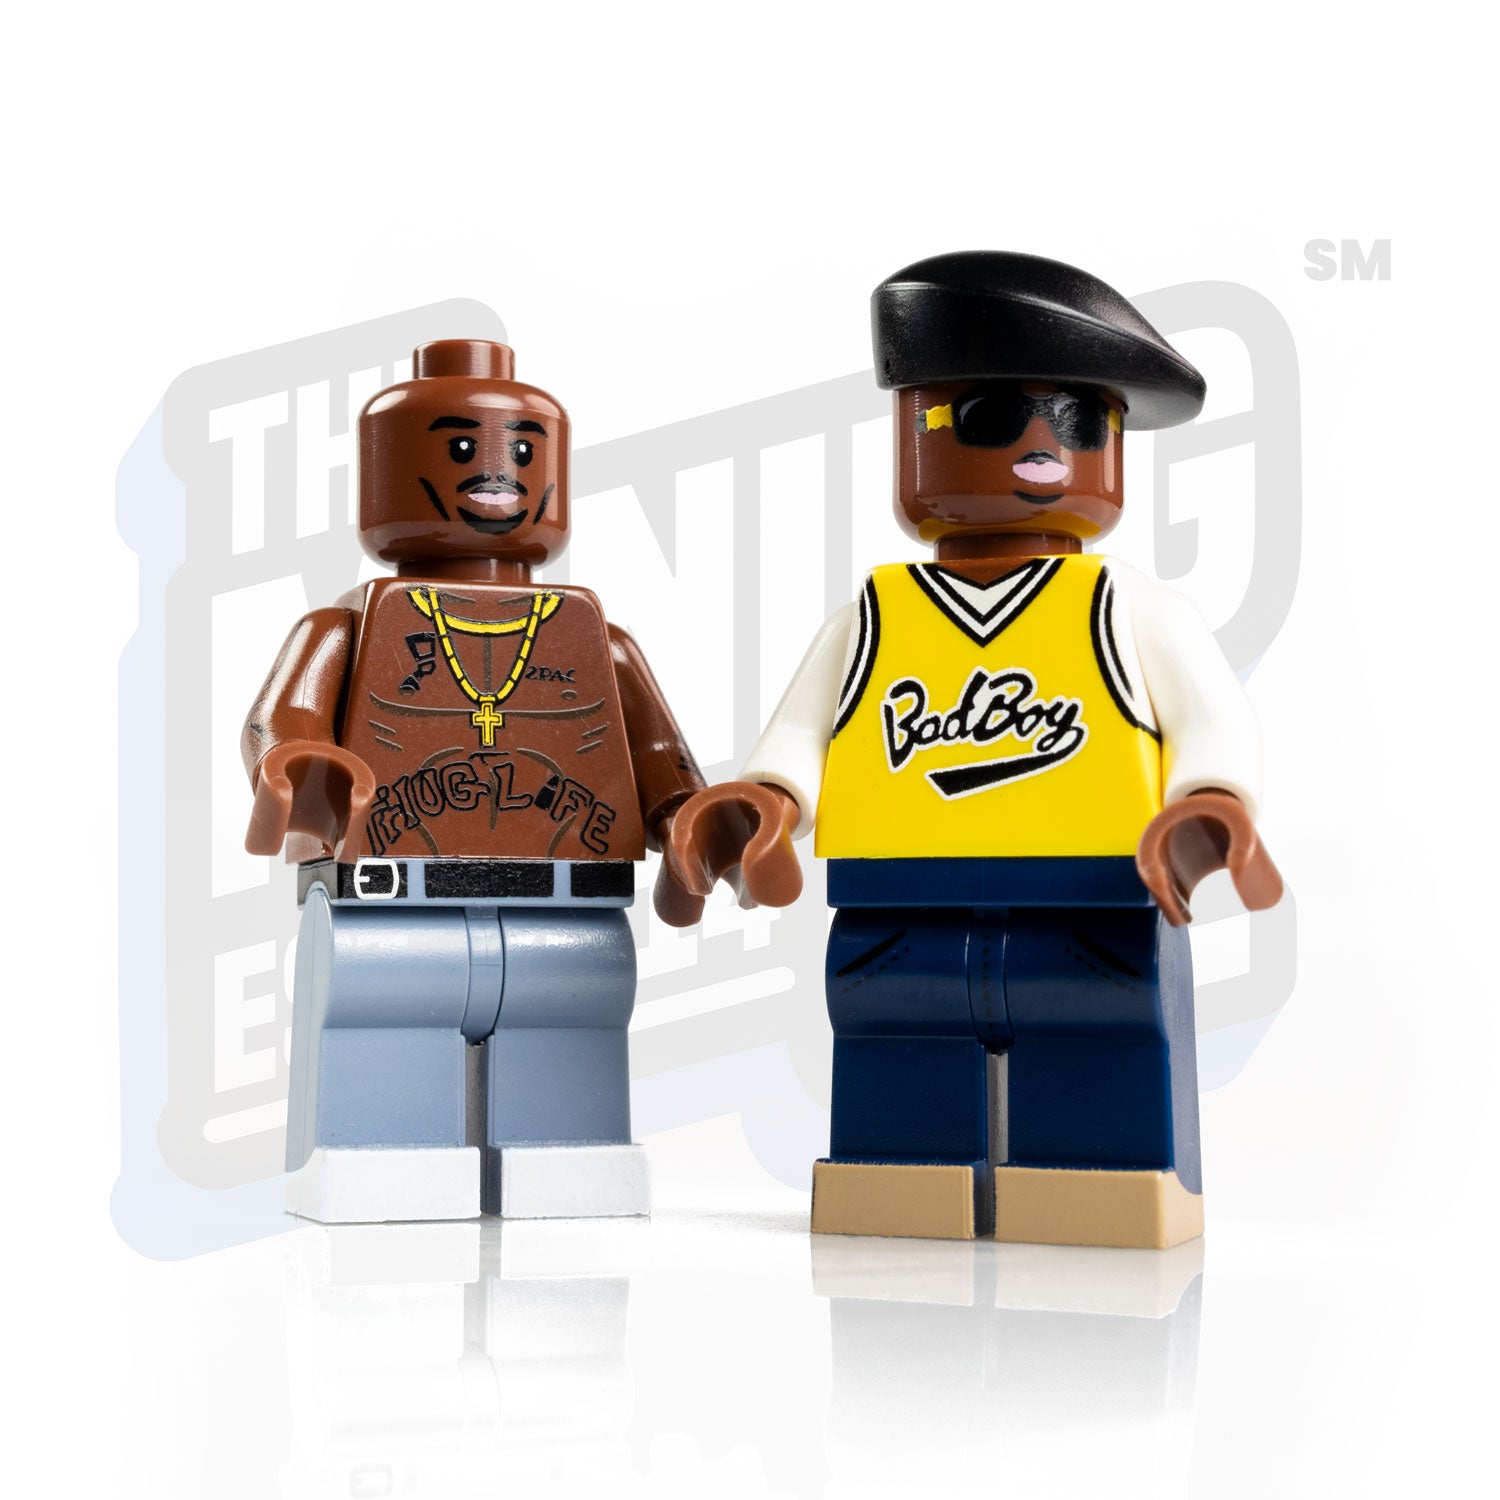 East vs West Rapper Pack - The Minifig Co.